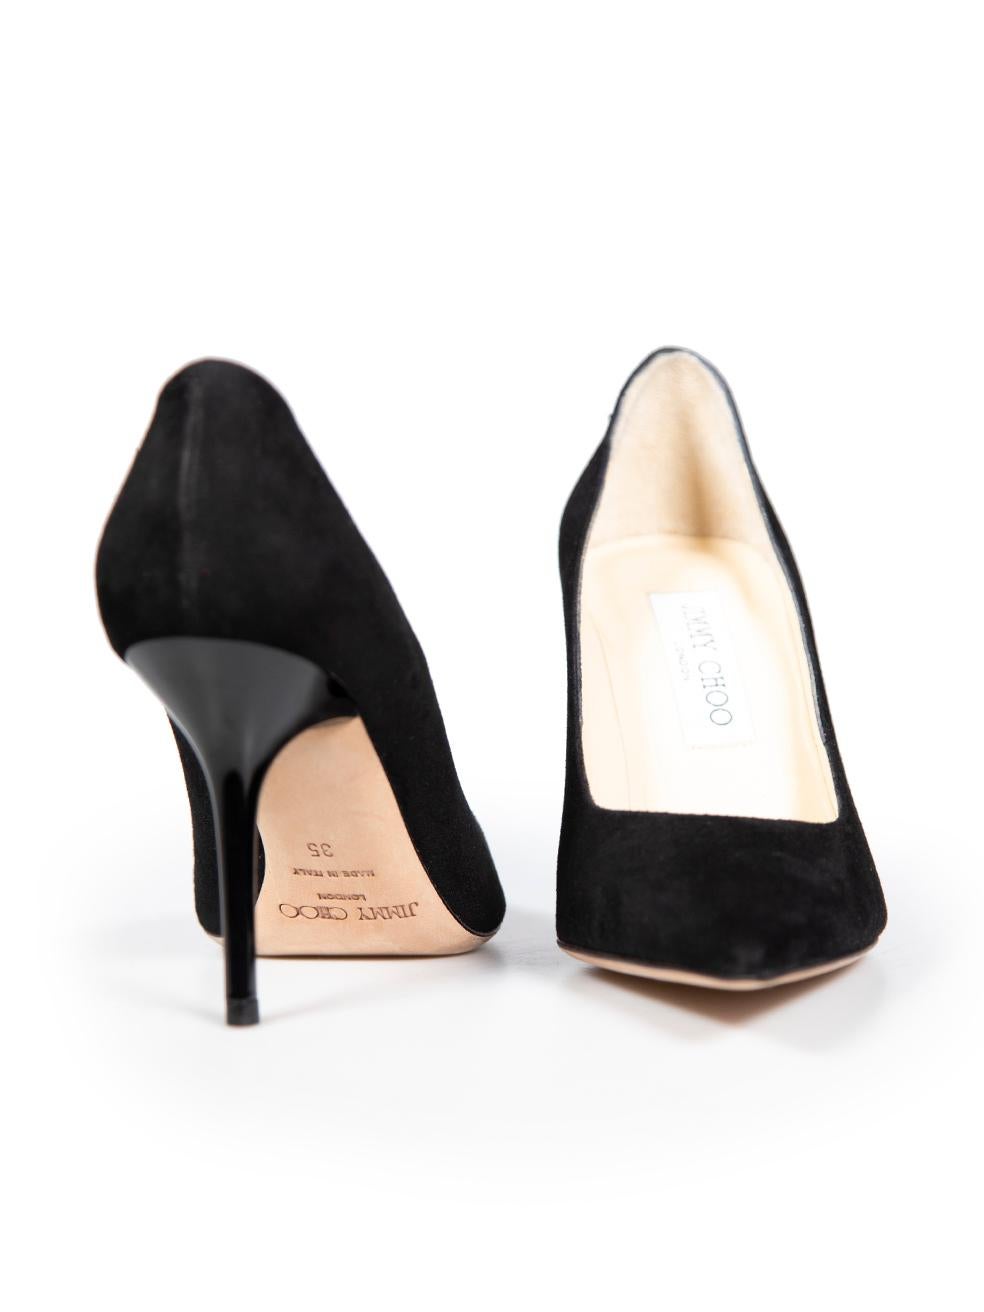 Jimmy Choo Black Suede High Heeled Pumps Size IT 35 In Good Condition For Sale In London, GB